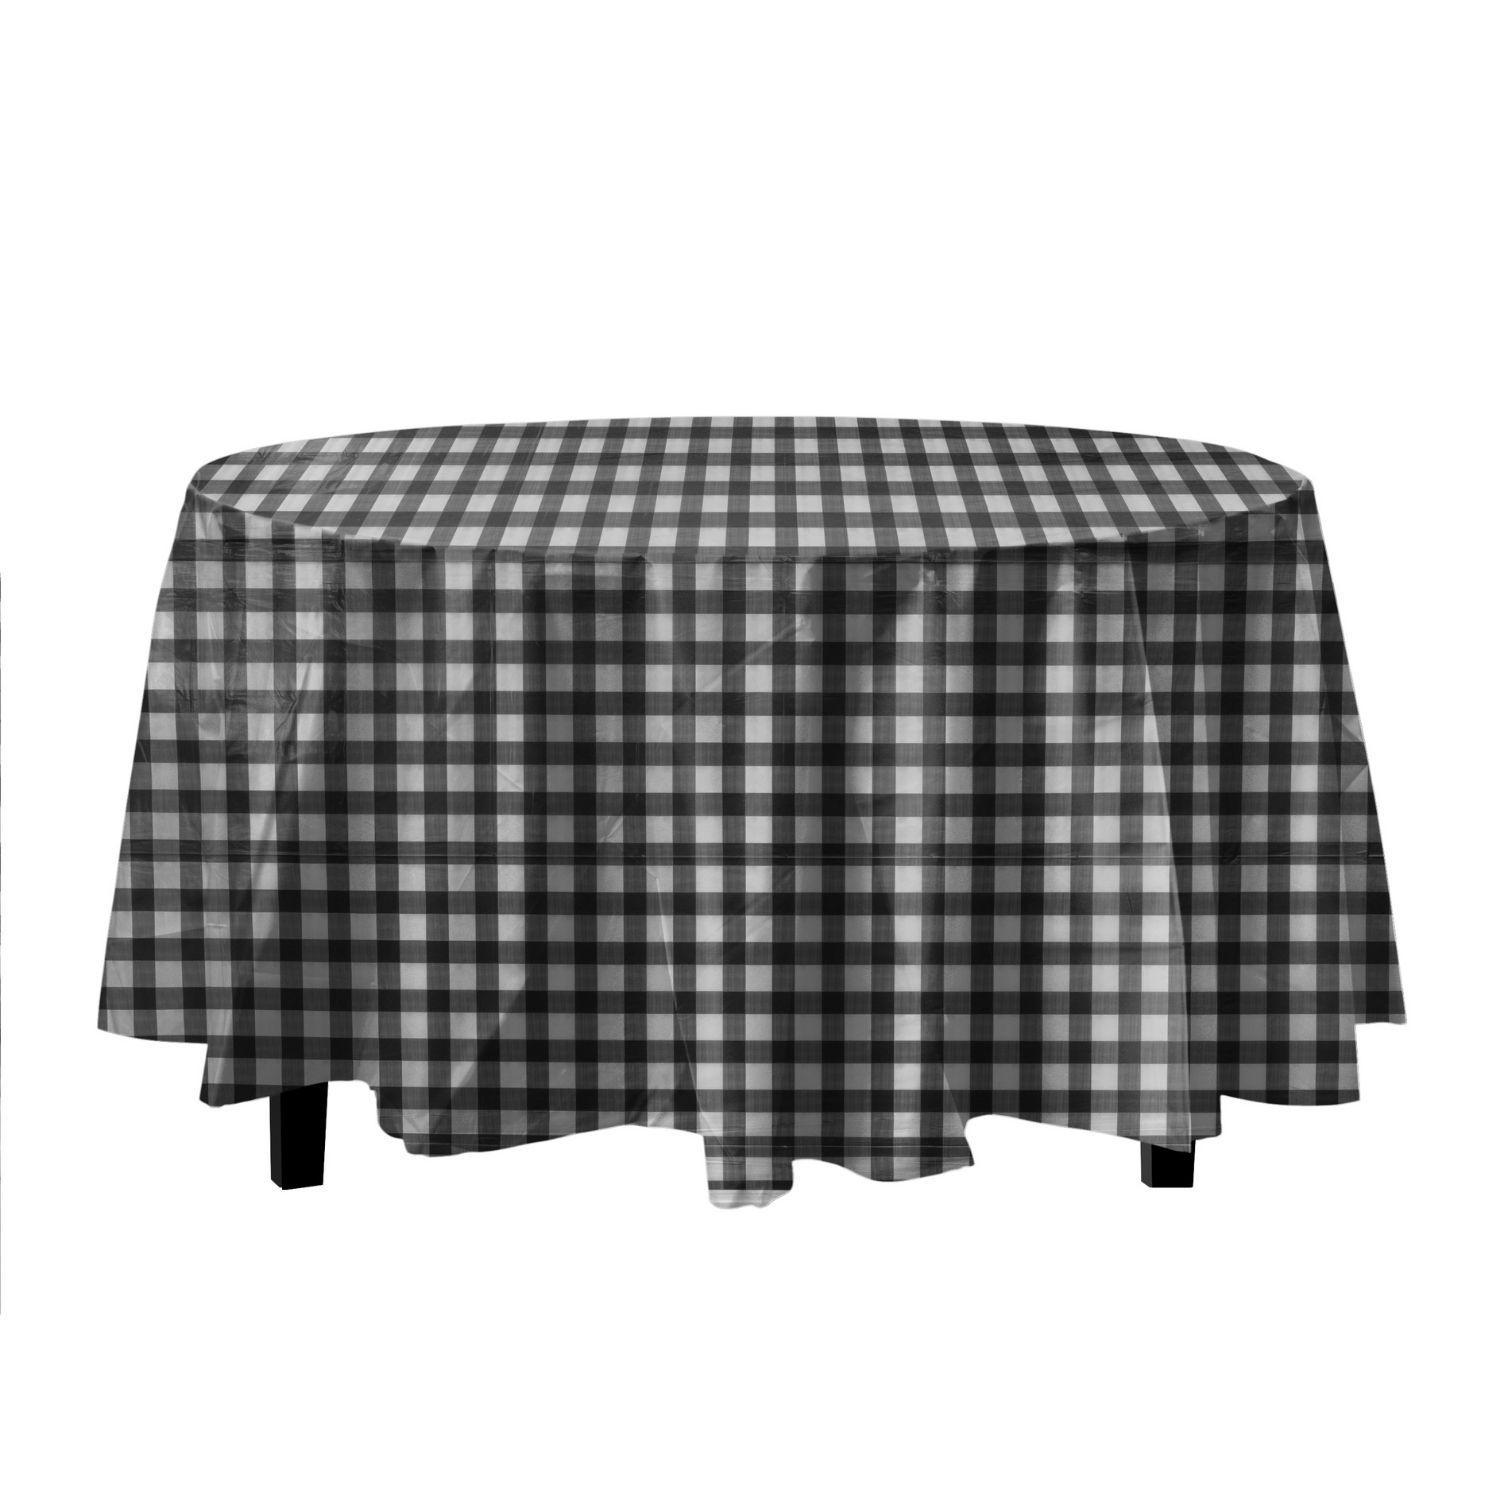 84in. Round Printed Plastic Table cover Black Gingham - 48 ct.